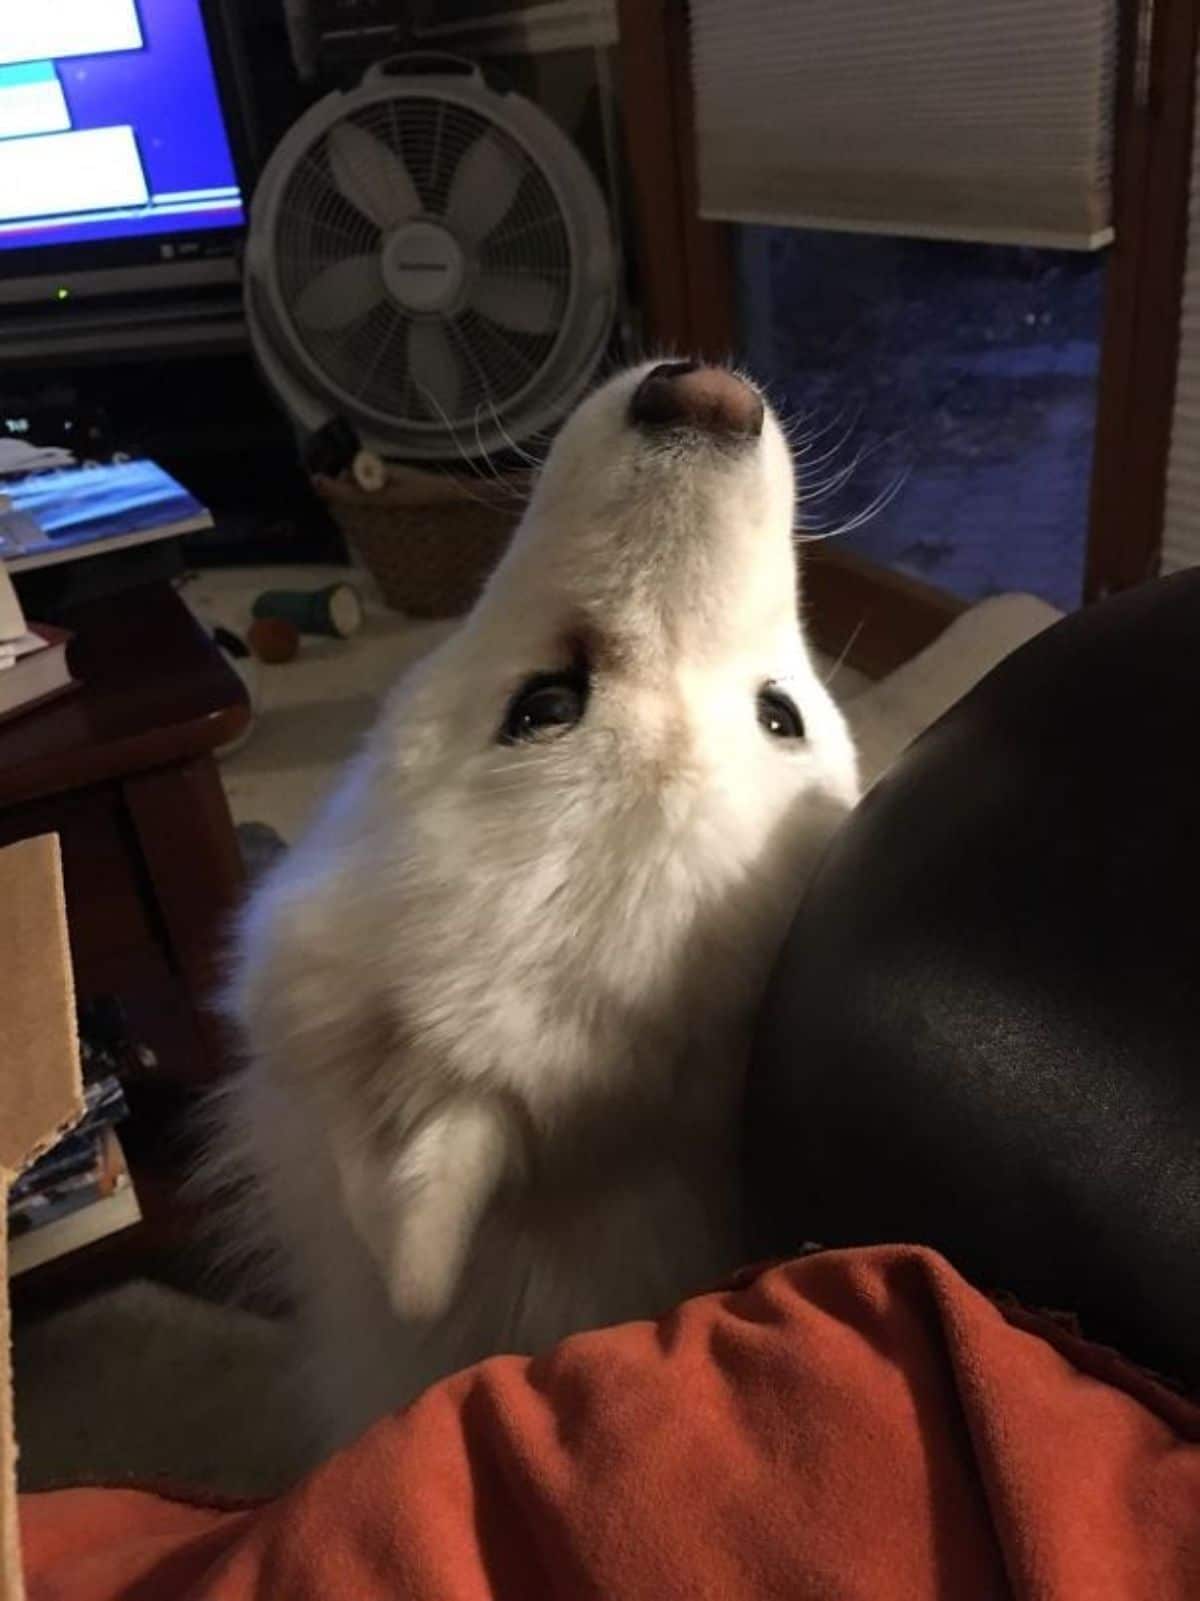 samoyed looking up at standing between a table and someone's legs